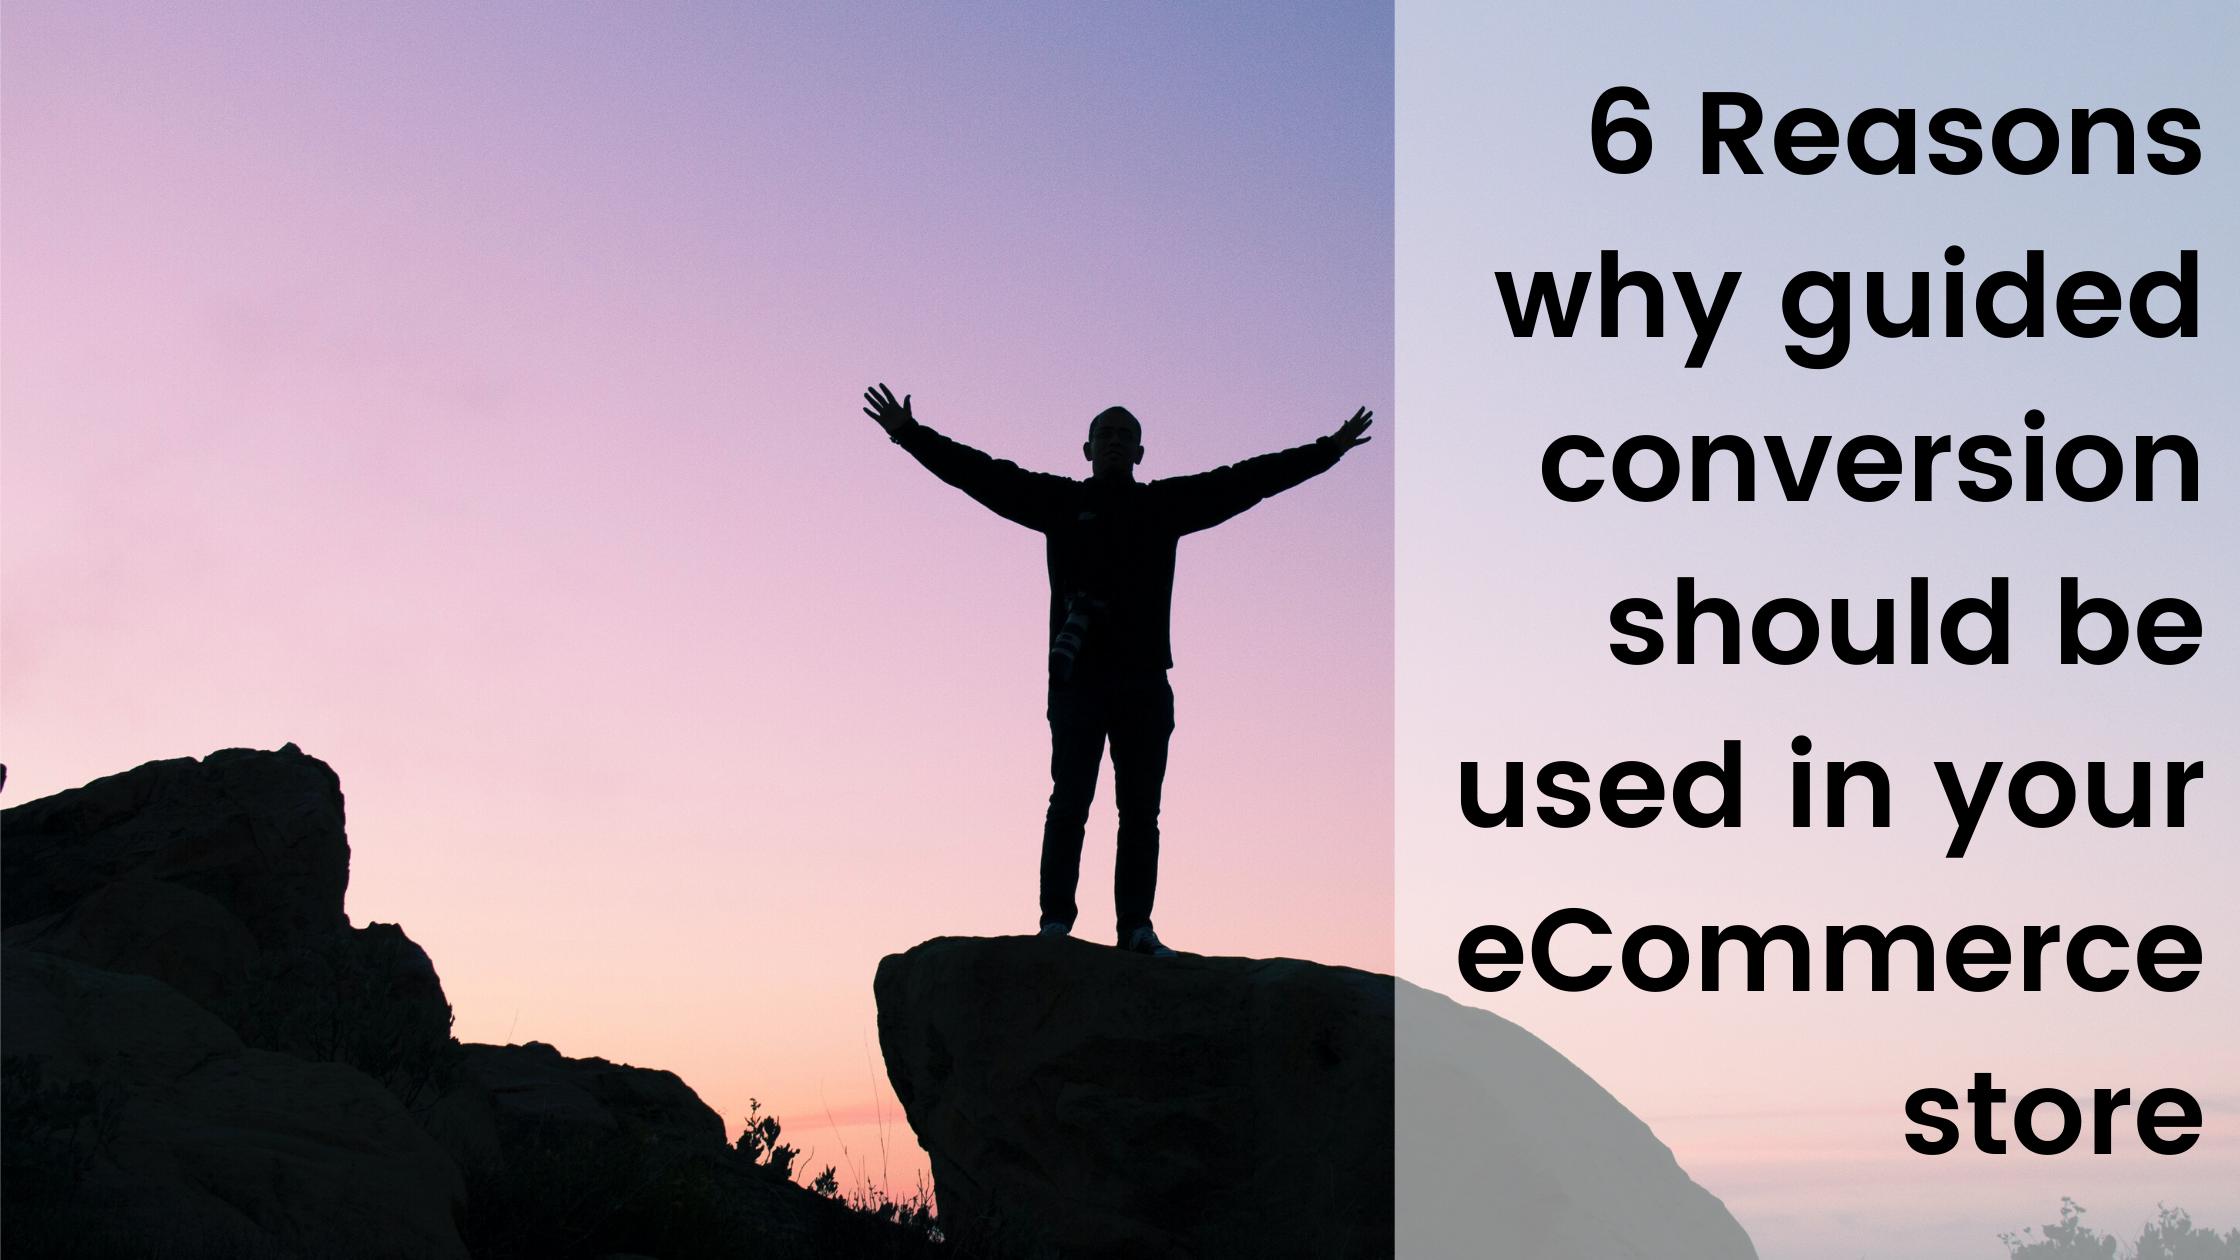 6 Reasons why guided conversion is the right eComm Conversion strategy 